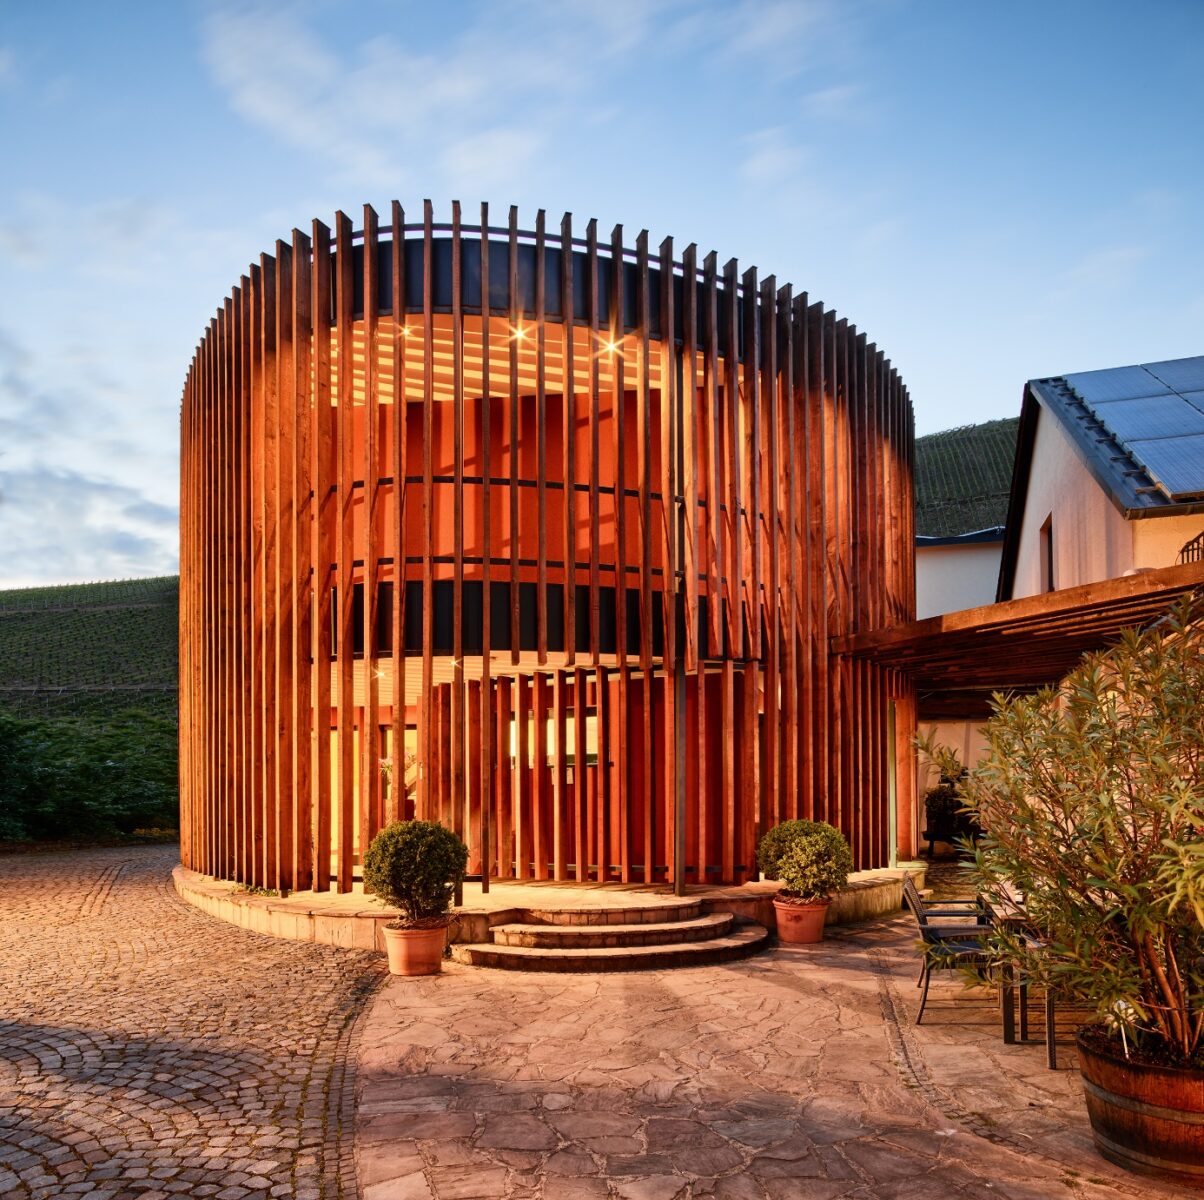 Sustainable Building - Regnery Winery, KlüSserath